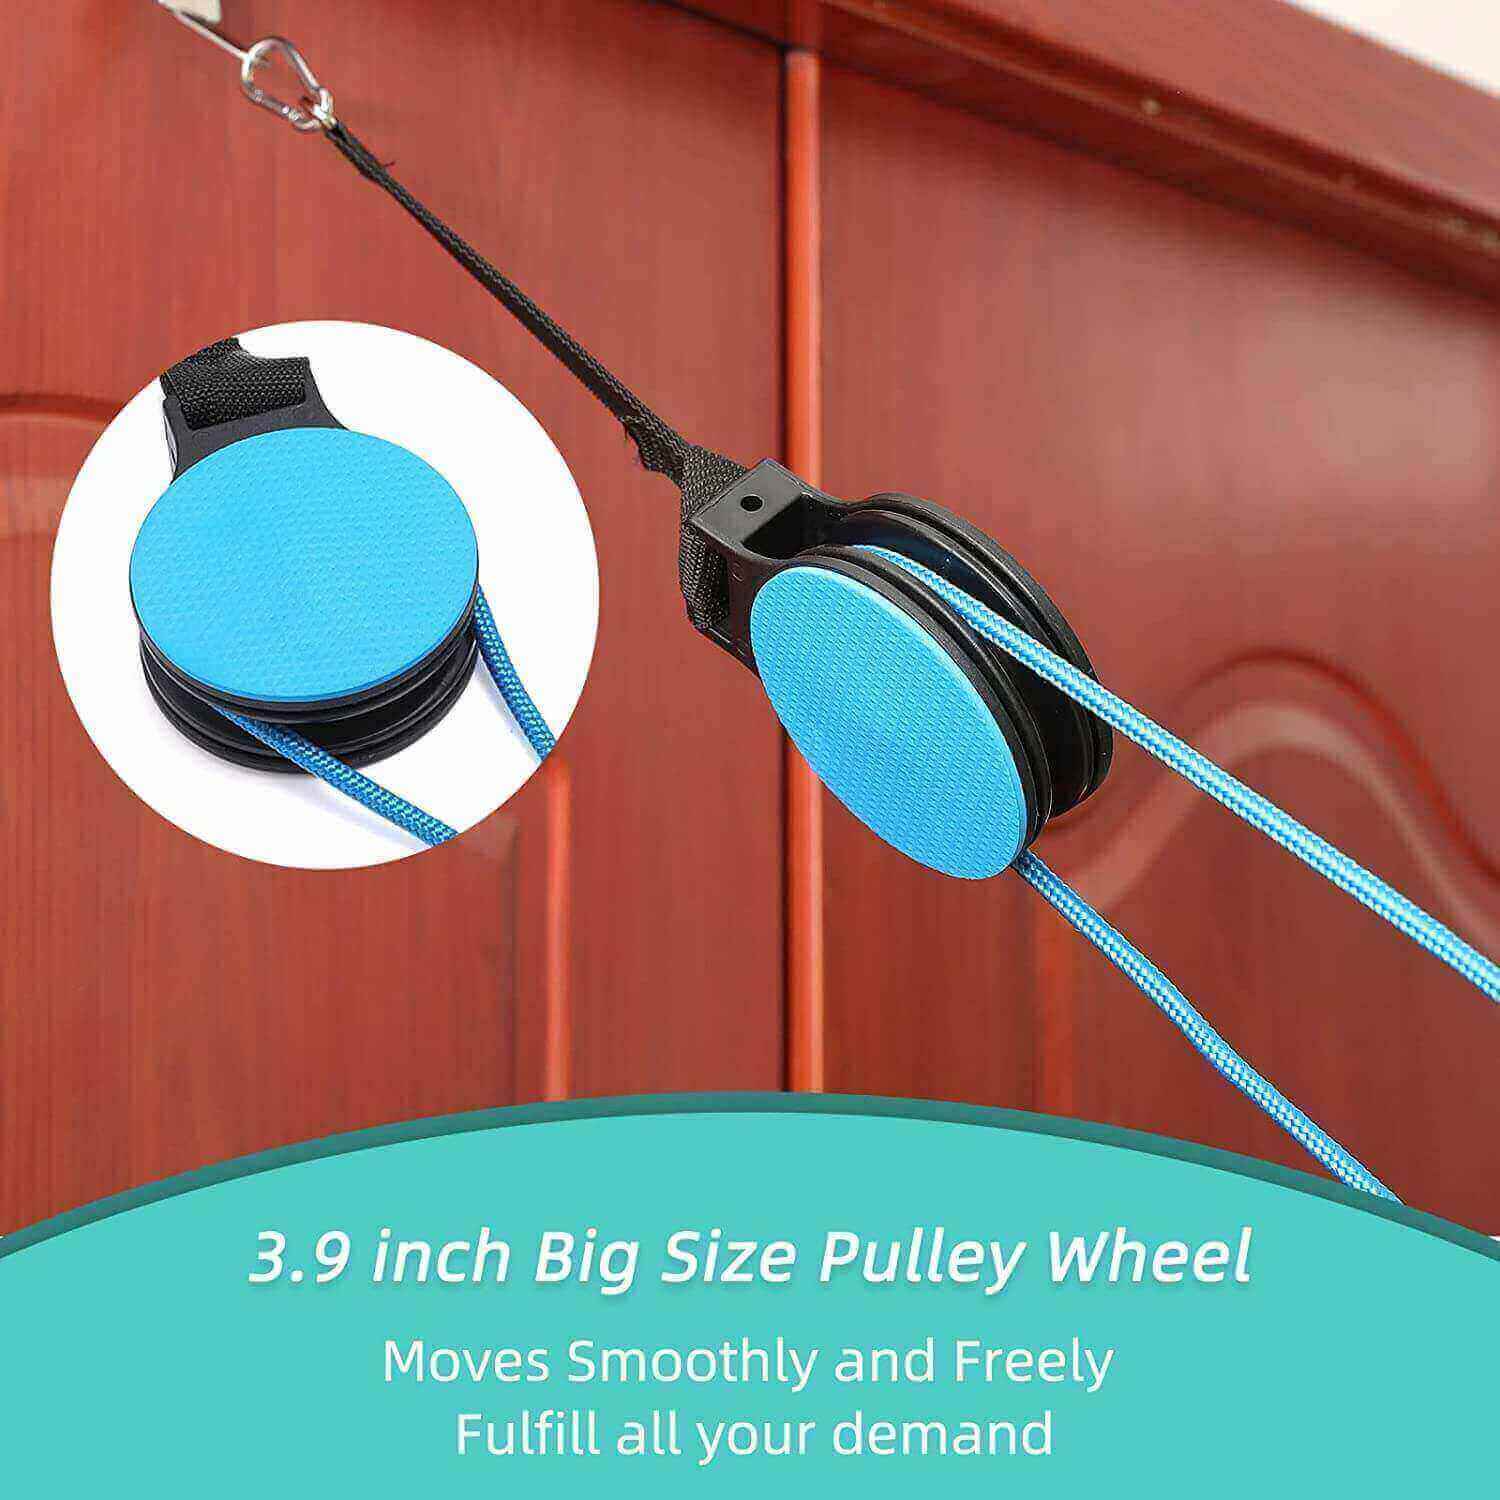 Fanwer Shoulder Pulley for Exercise Therapy, Frozen Shoulder Exercise, pulley details